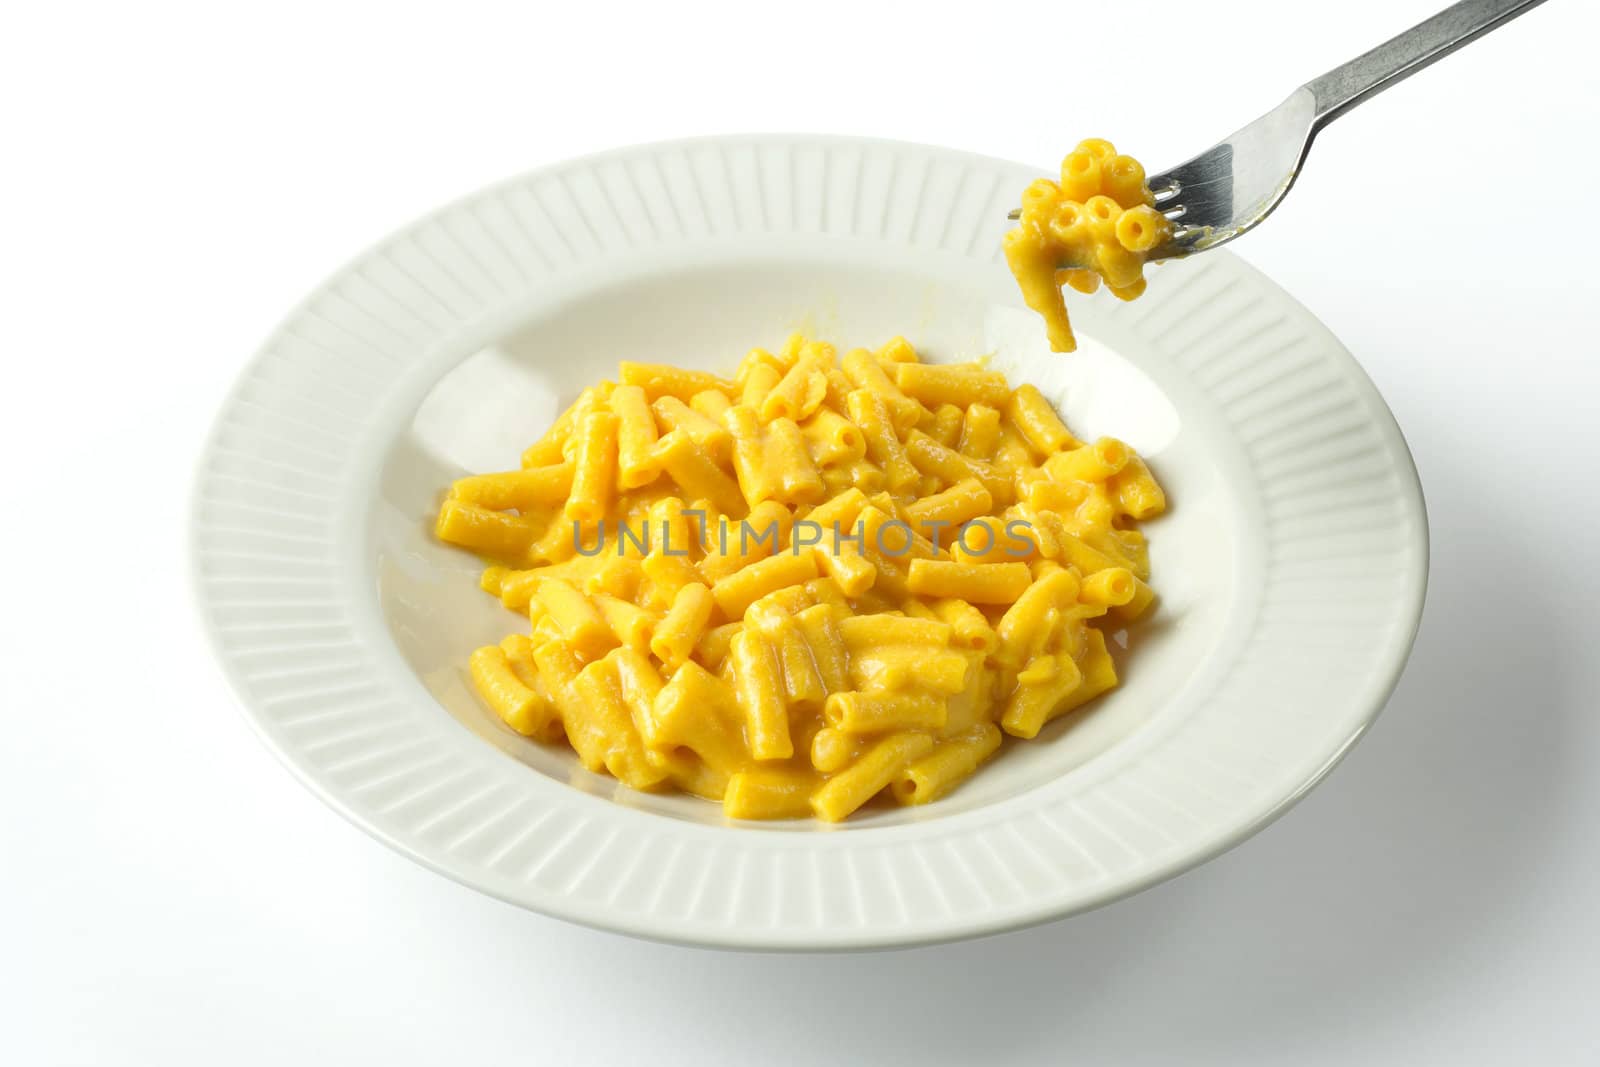 A bowl of macaroni and cheese and a forkful of pasta.
